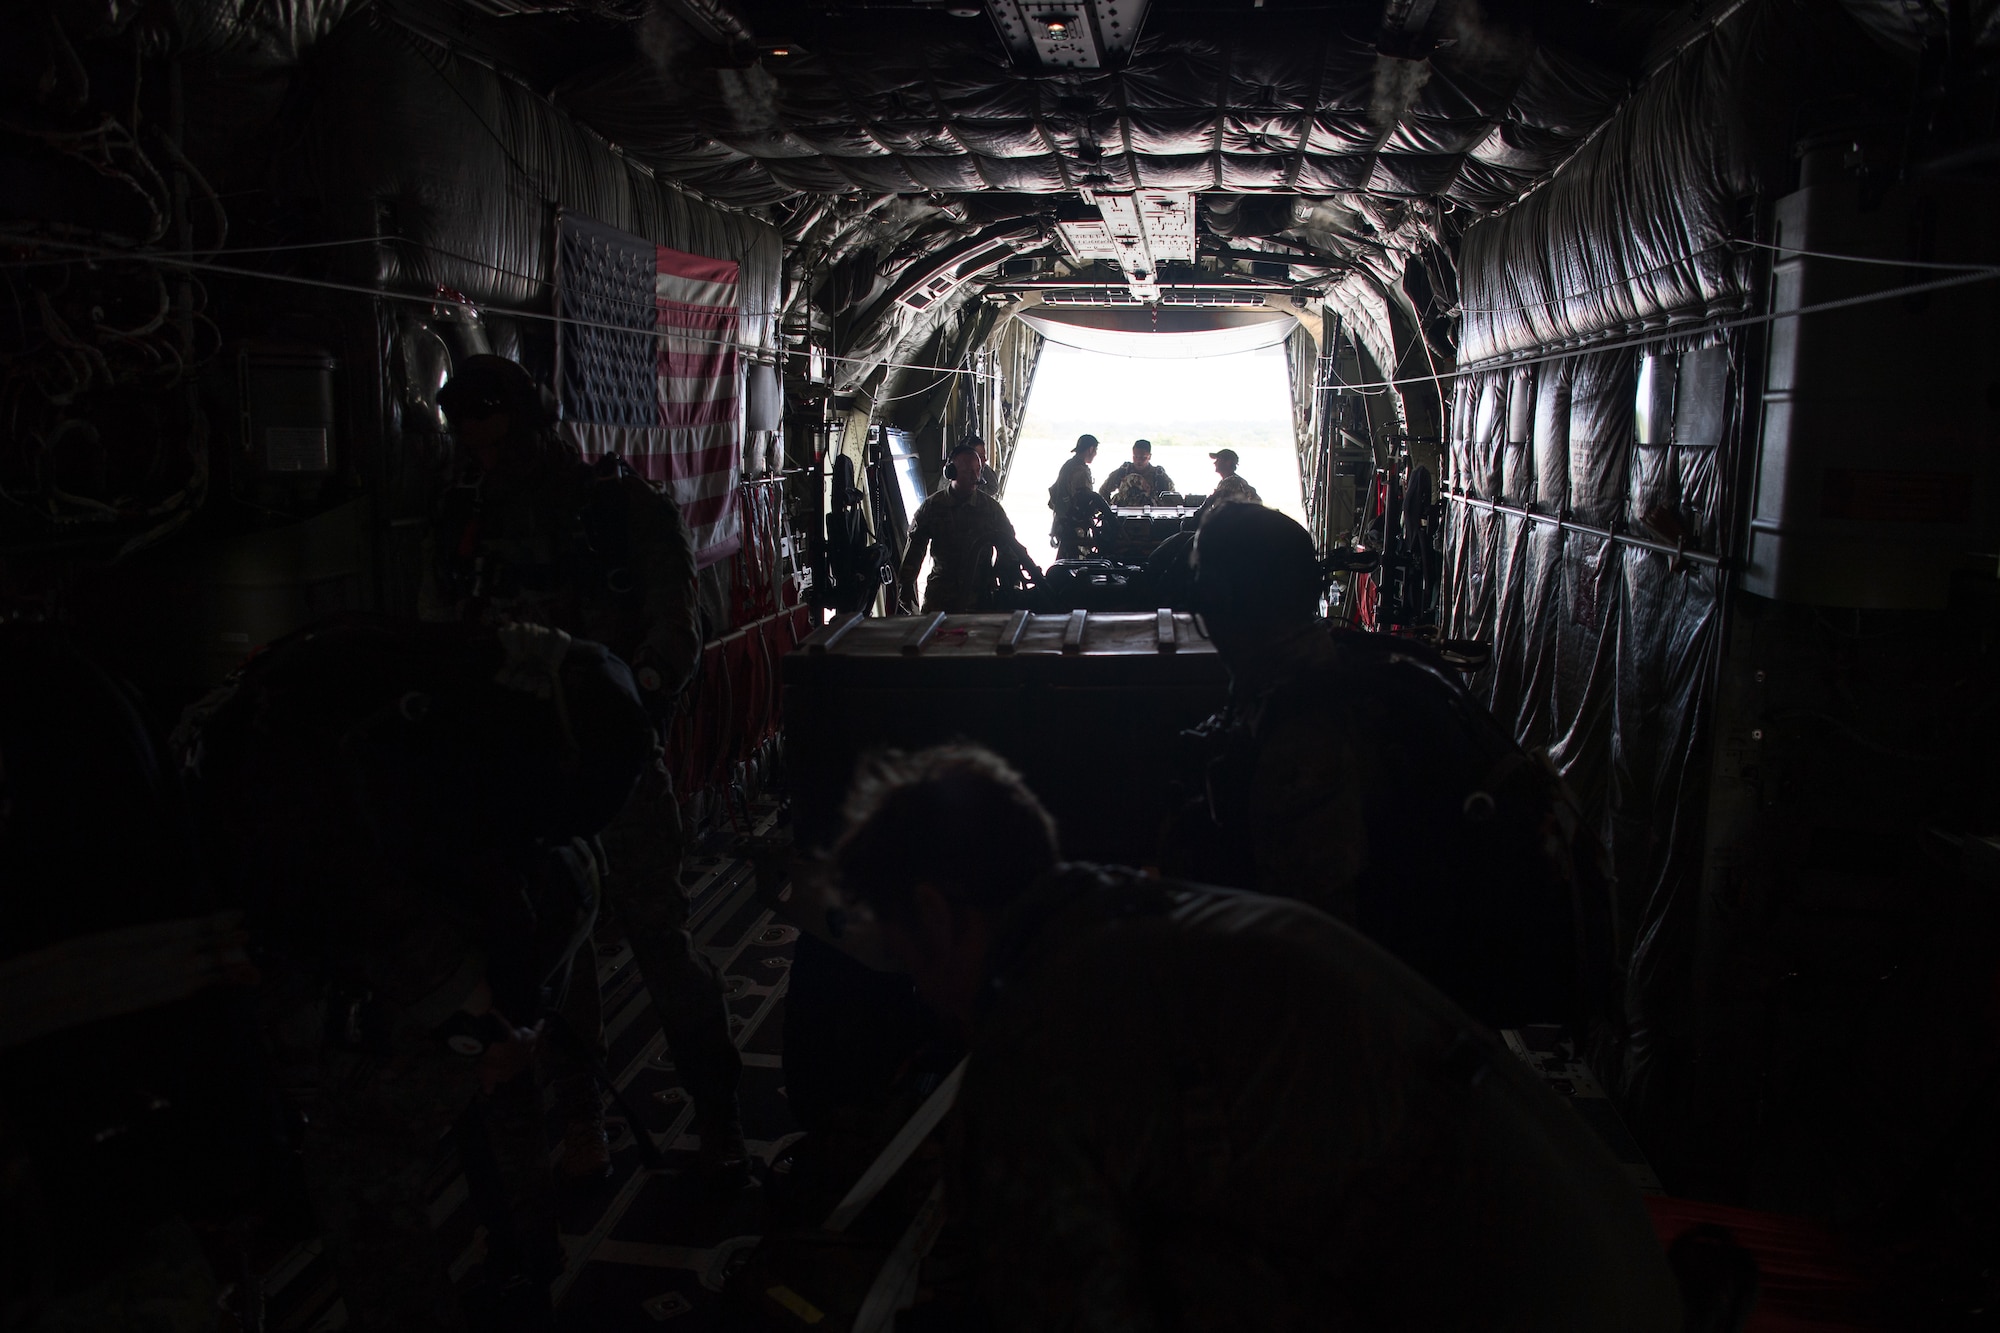 Aircrew members assigned to the 815th Airlift Squadron, Keesler Air Force Base, Mississippi, prepare to fly a C-130J Super Hercules for an airdrop of Royal Australian Air Force combat controllers assigned to the 4th Squadron, Bravo flight, during Exercise Cope North 20, Feb. 14, 2020, Andersen Air Force Base, Guam. Cope North 20 is an annual trilateral field training exercise conducted at Andersen Air Force Base, Guam, and around the Commonwealth of the Northern Mariana Islands (CNMI), Palau and Yap in the Federated States of Micronesia. (U.S. Air Force photo by Senior Airman Gracie Lee)